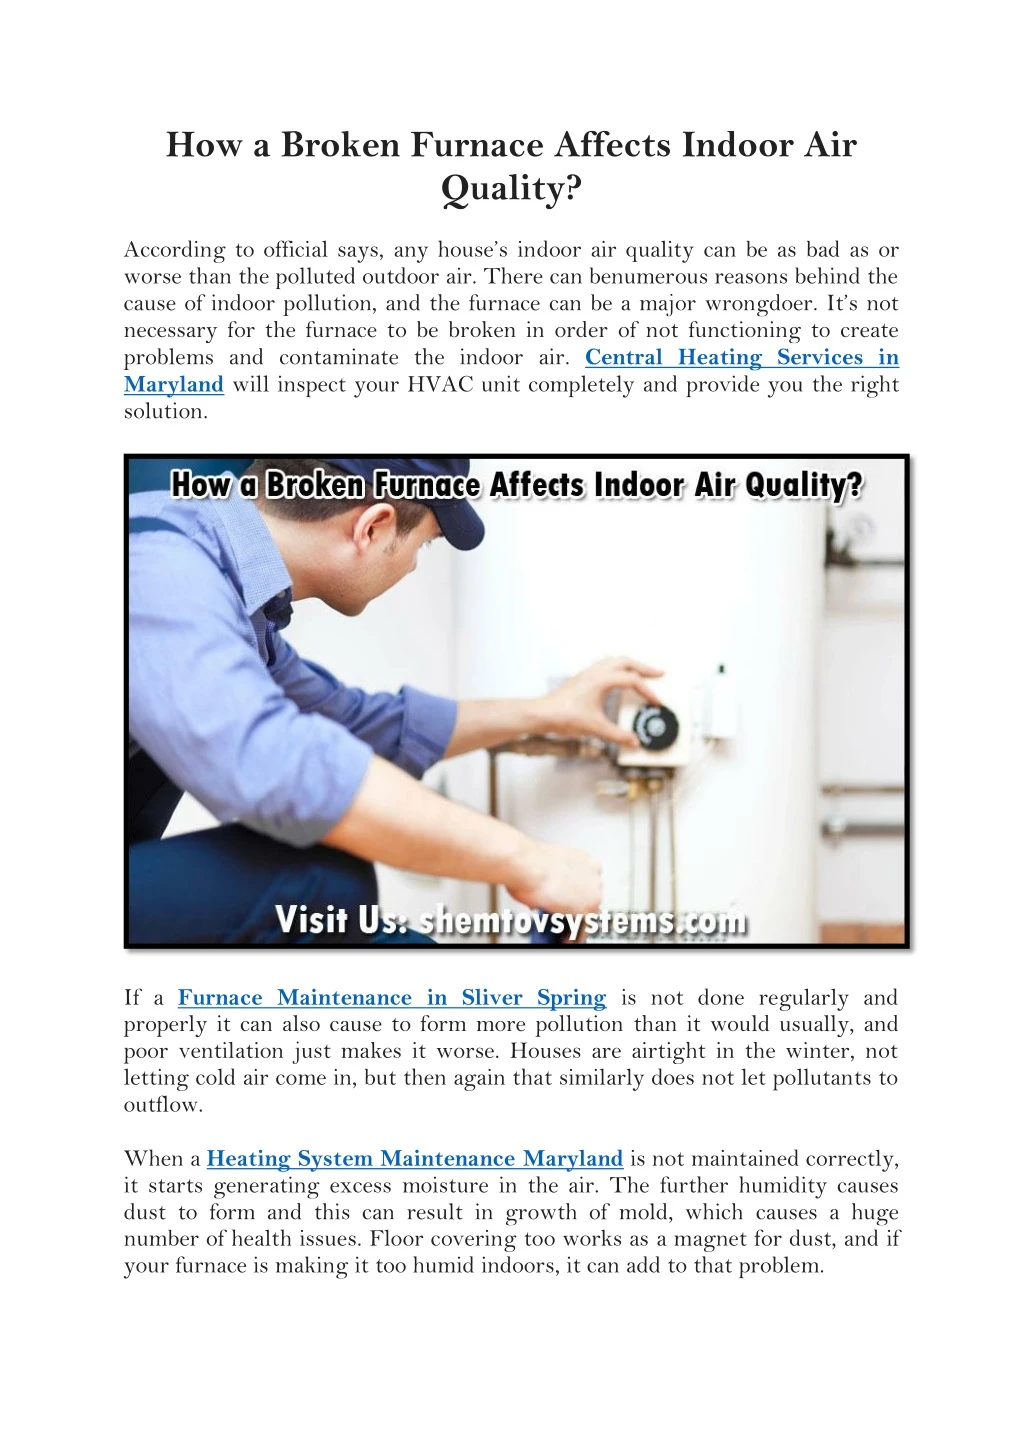 how a broken furnace affects indoor air quality